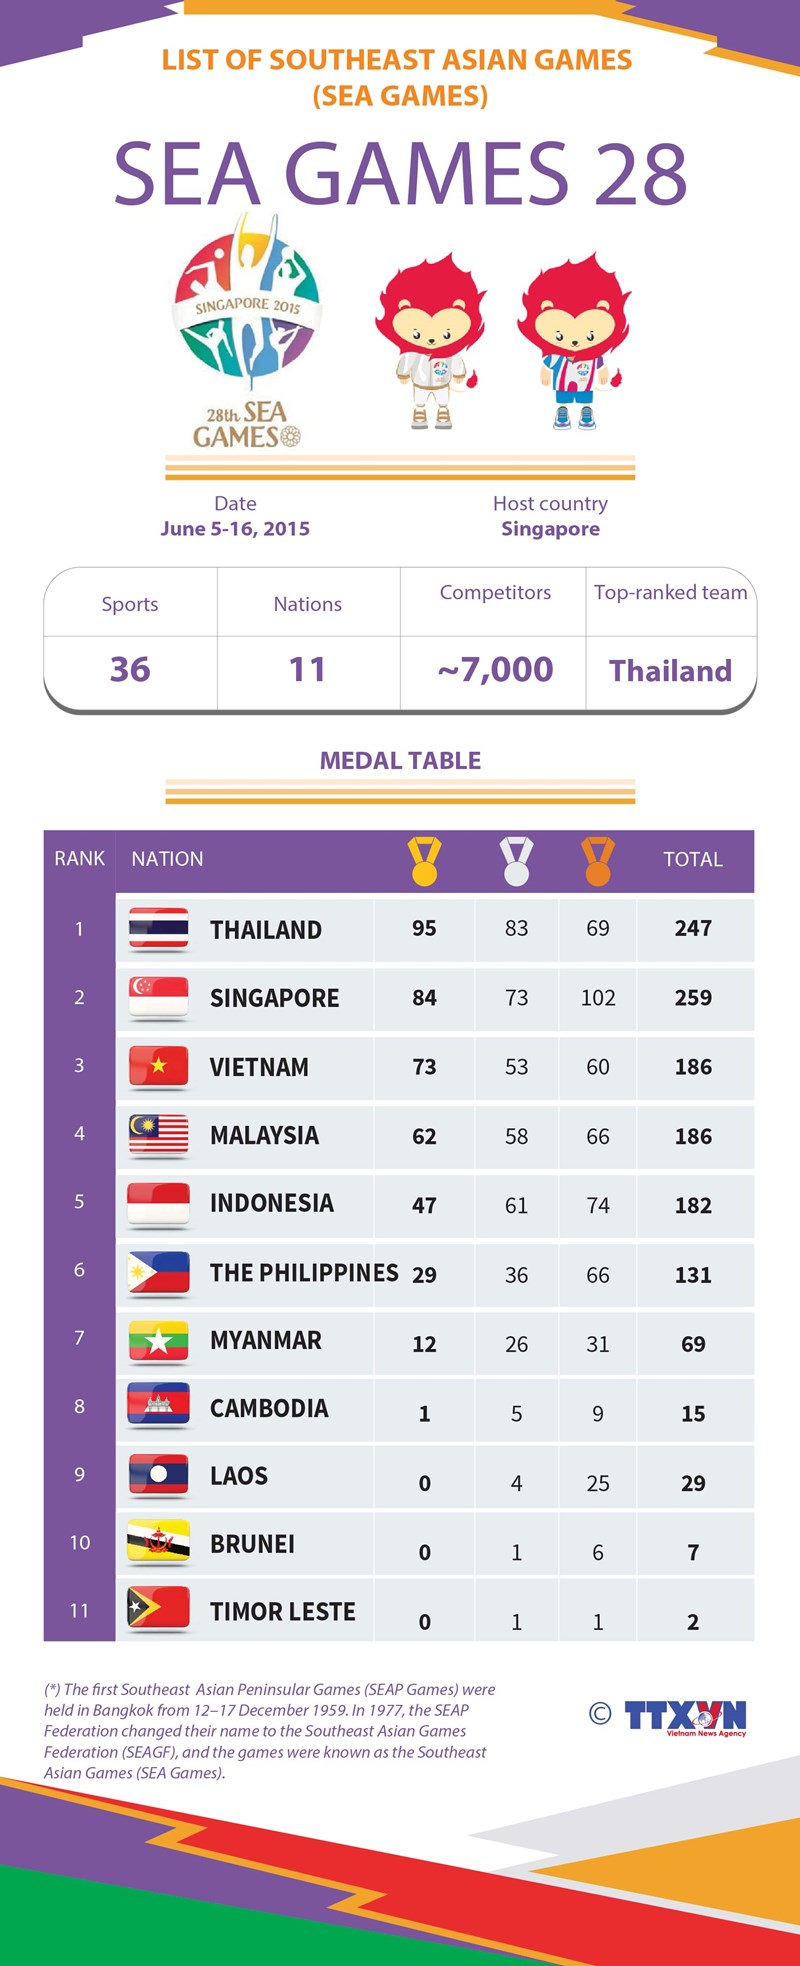 List of Southeast Asian Games: SEA Games 28 hinh anh 1